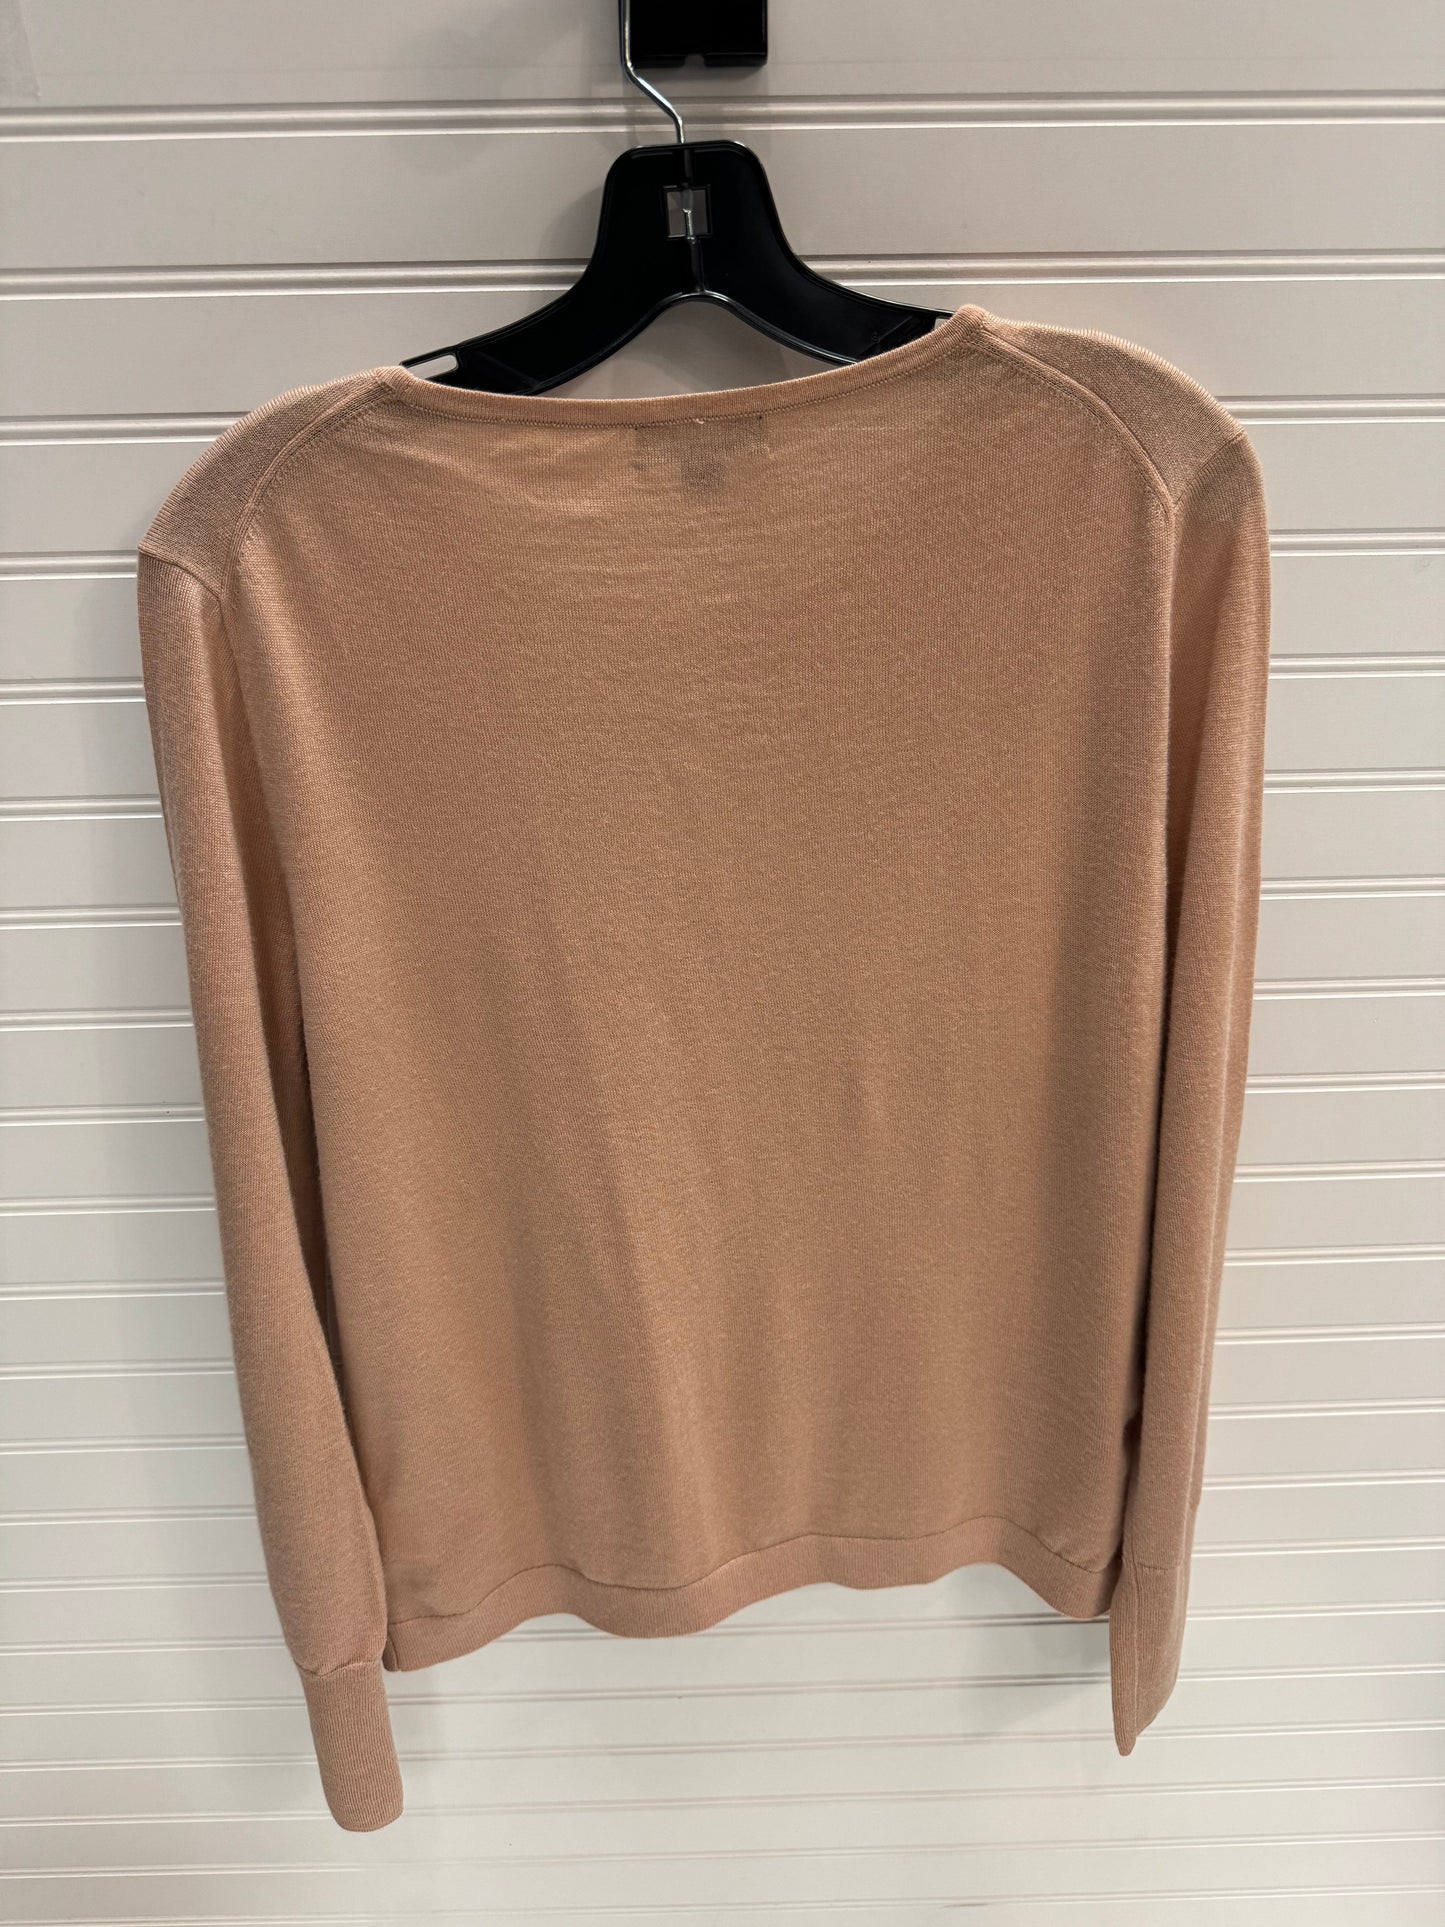 Pink Top Long Sleeve J. Crew, Size L